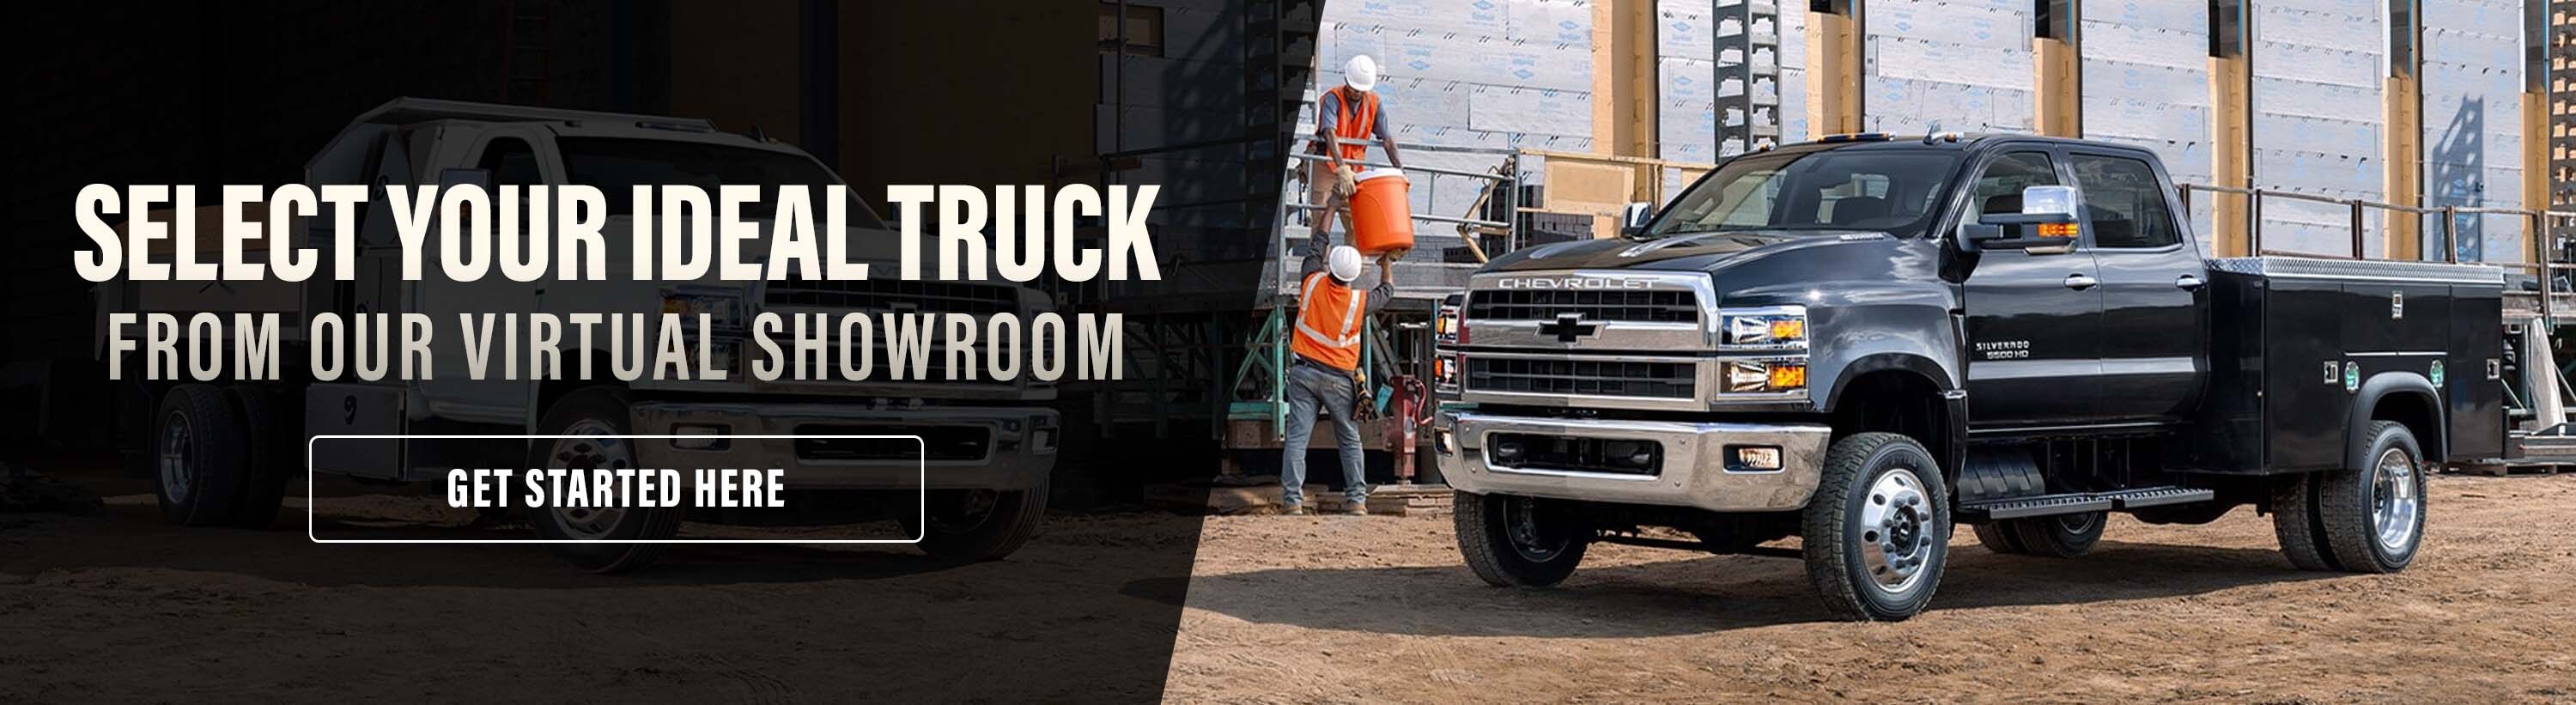 Select your ideal truck from our virtual showroom. Get Started Here.